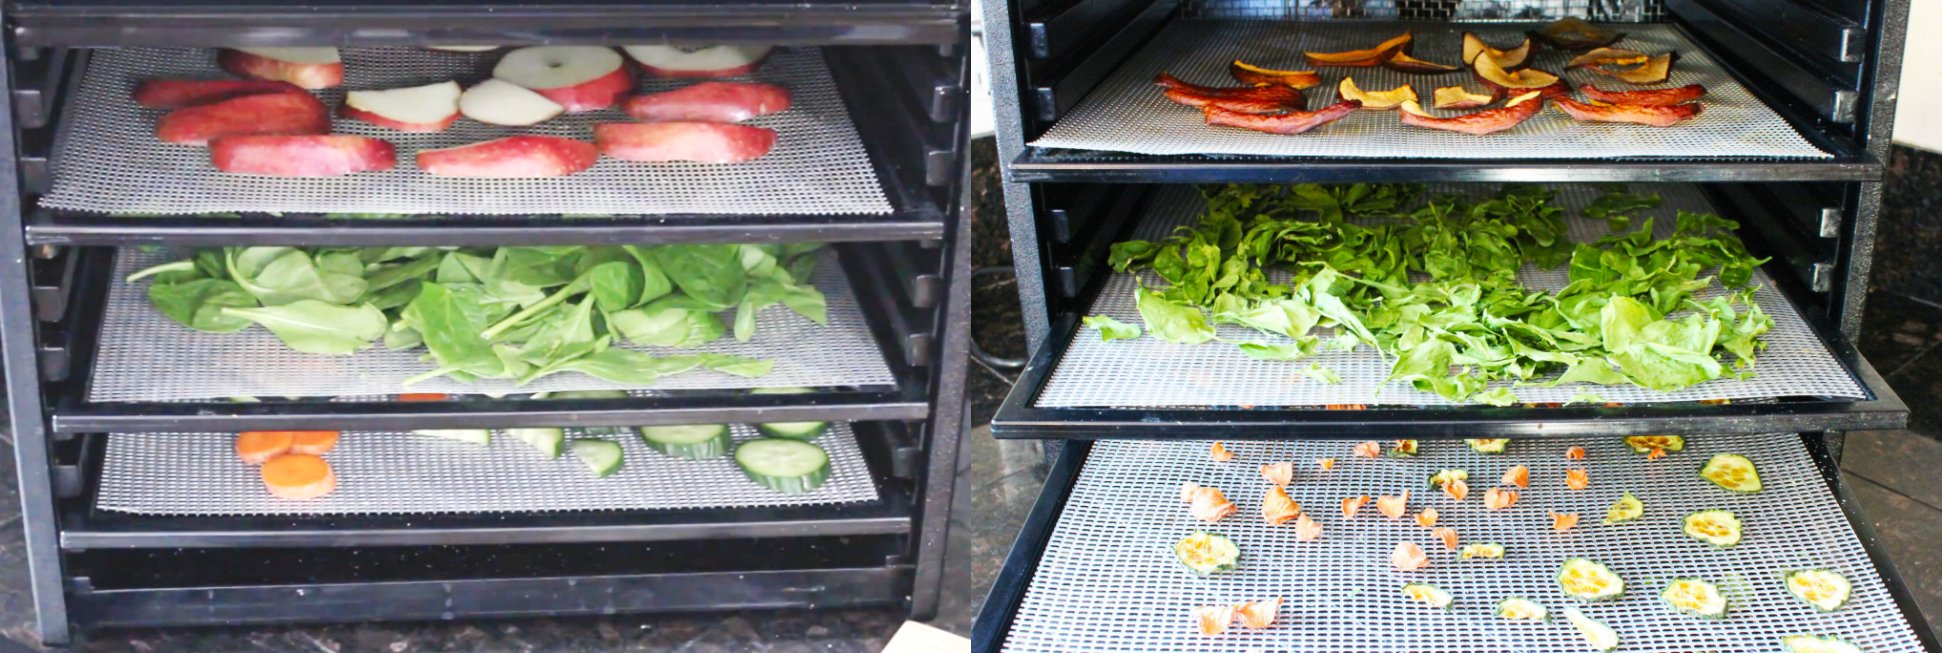 How a Food Dehydrator Can Help You Reduce Kitchen Waste